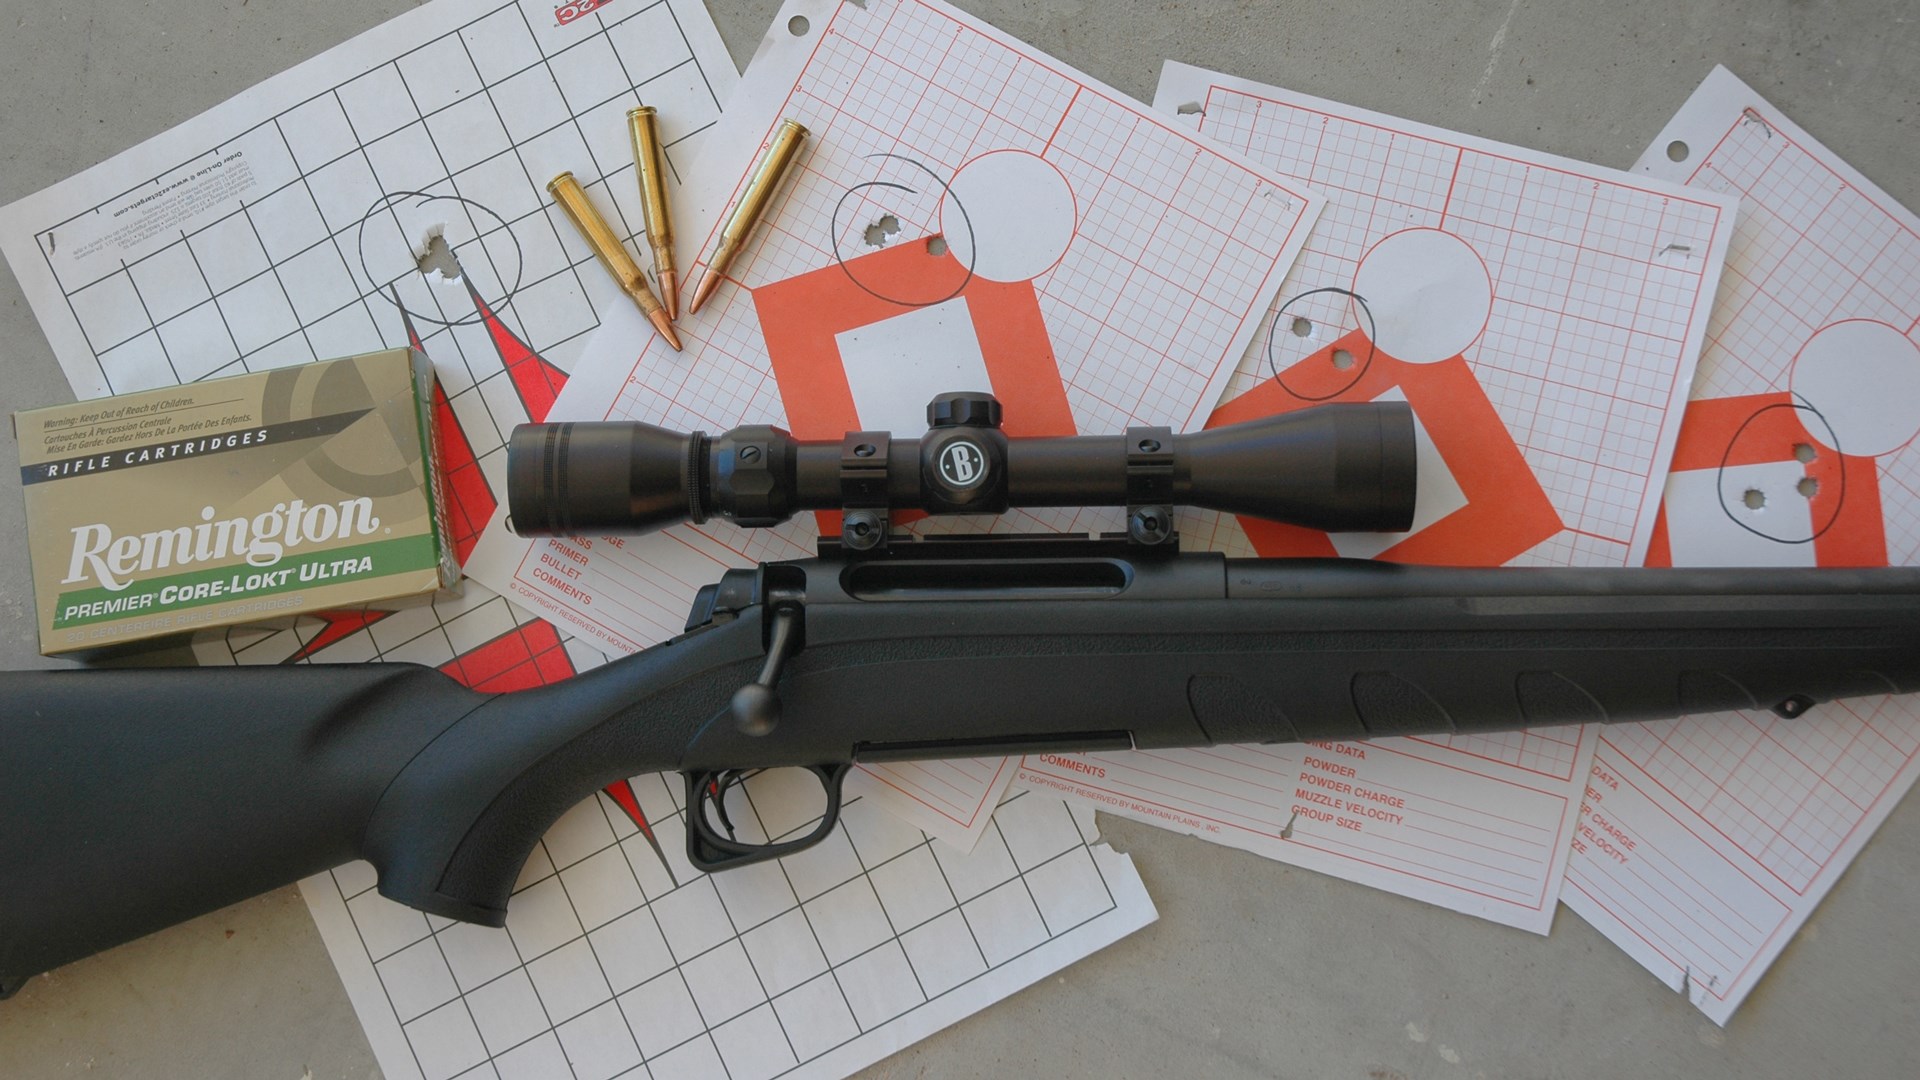 The Remington M783 is quite different from the flagship M700 and comes at about half the cost. The M783 (shown above) came with a 3-9X scope and the author found its accuracy with Remington ammo to be amazing.